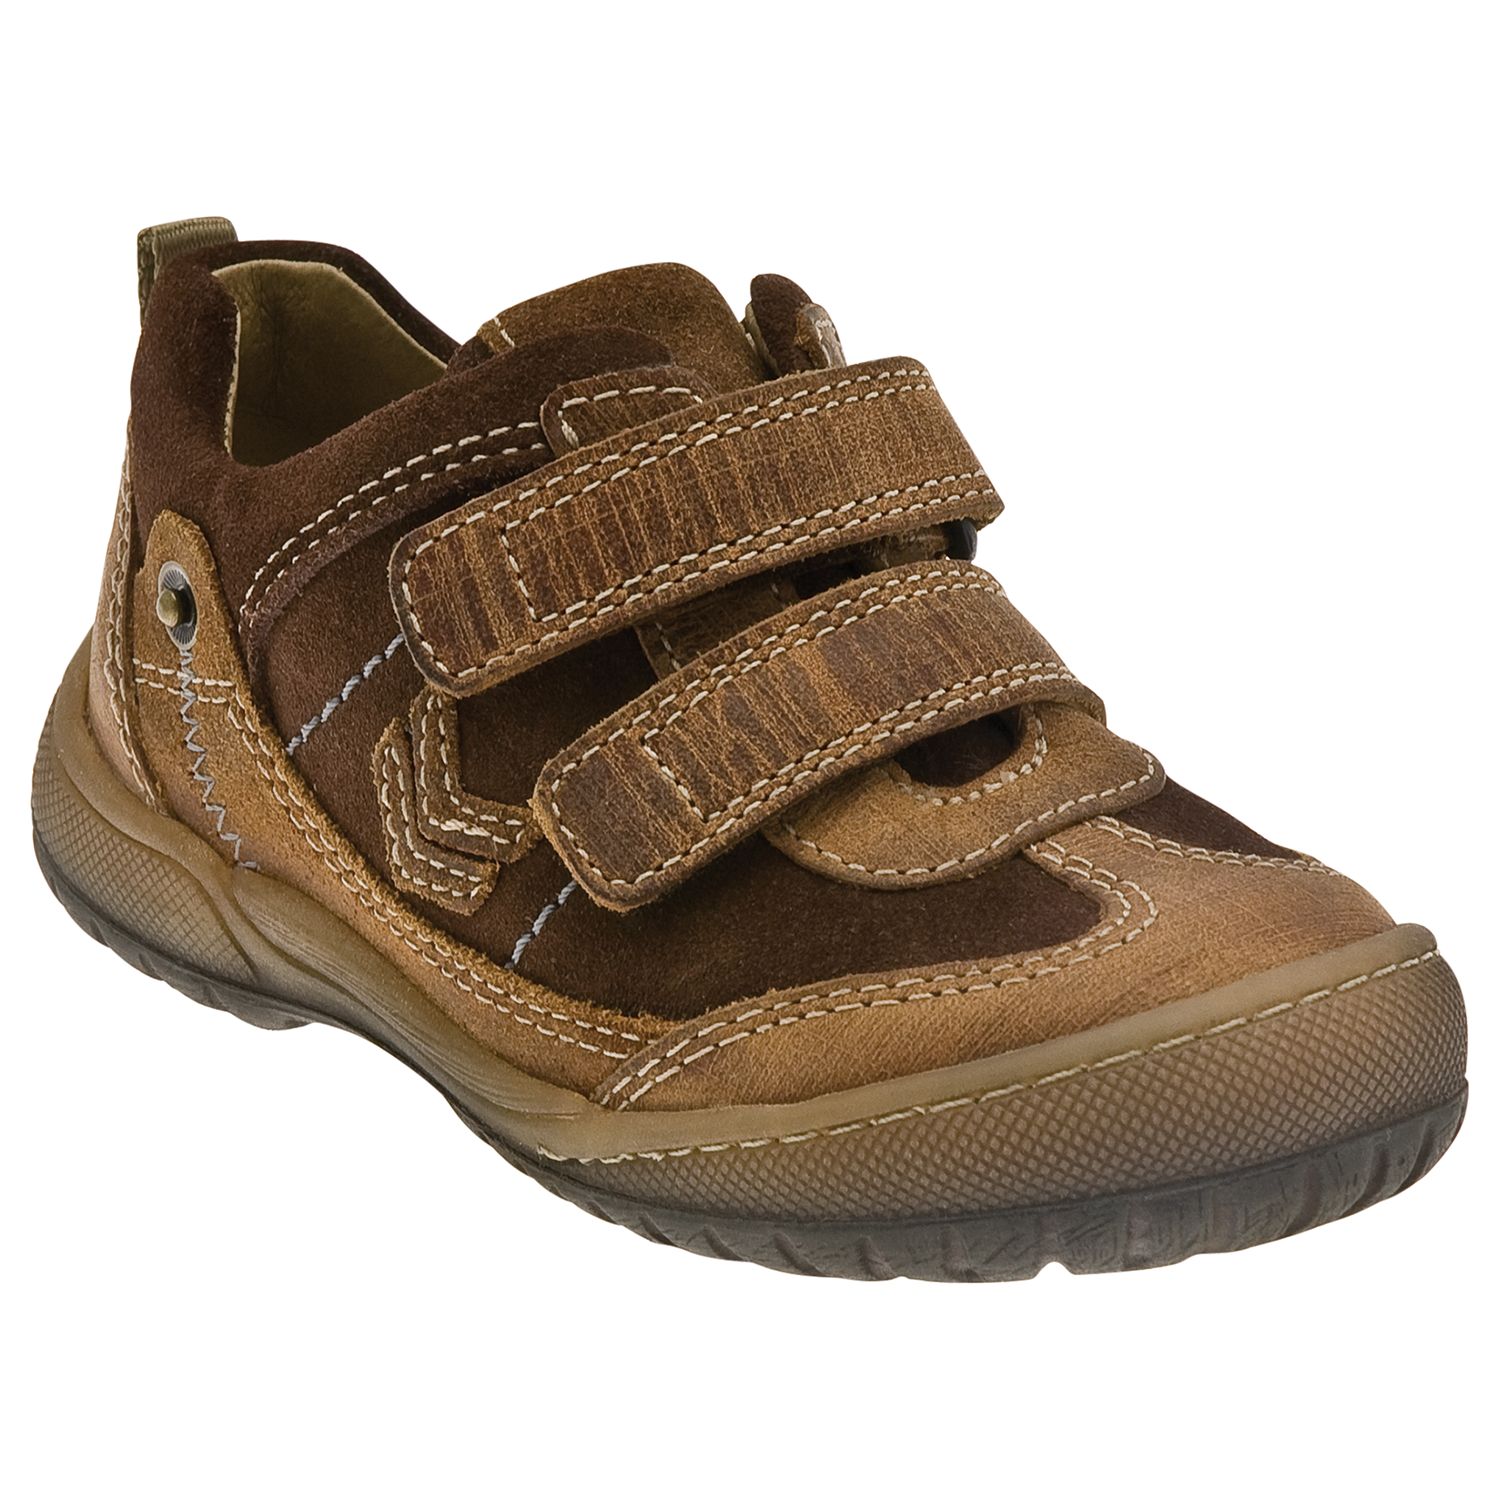 Start-rite Trail Shoes, Tan - review, compare prices, buy online